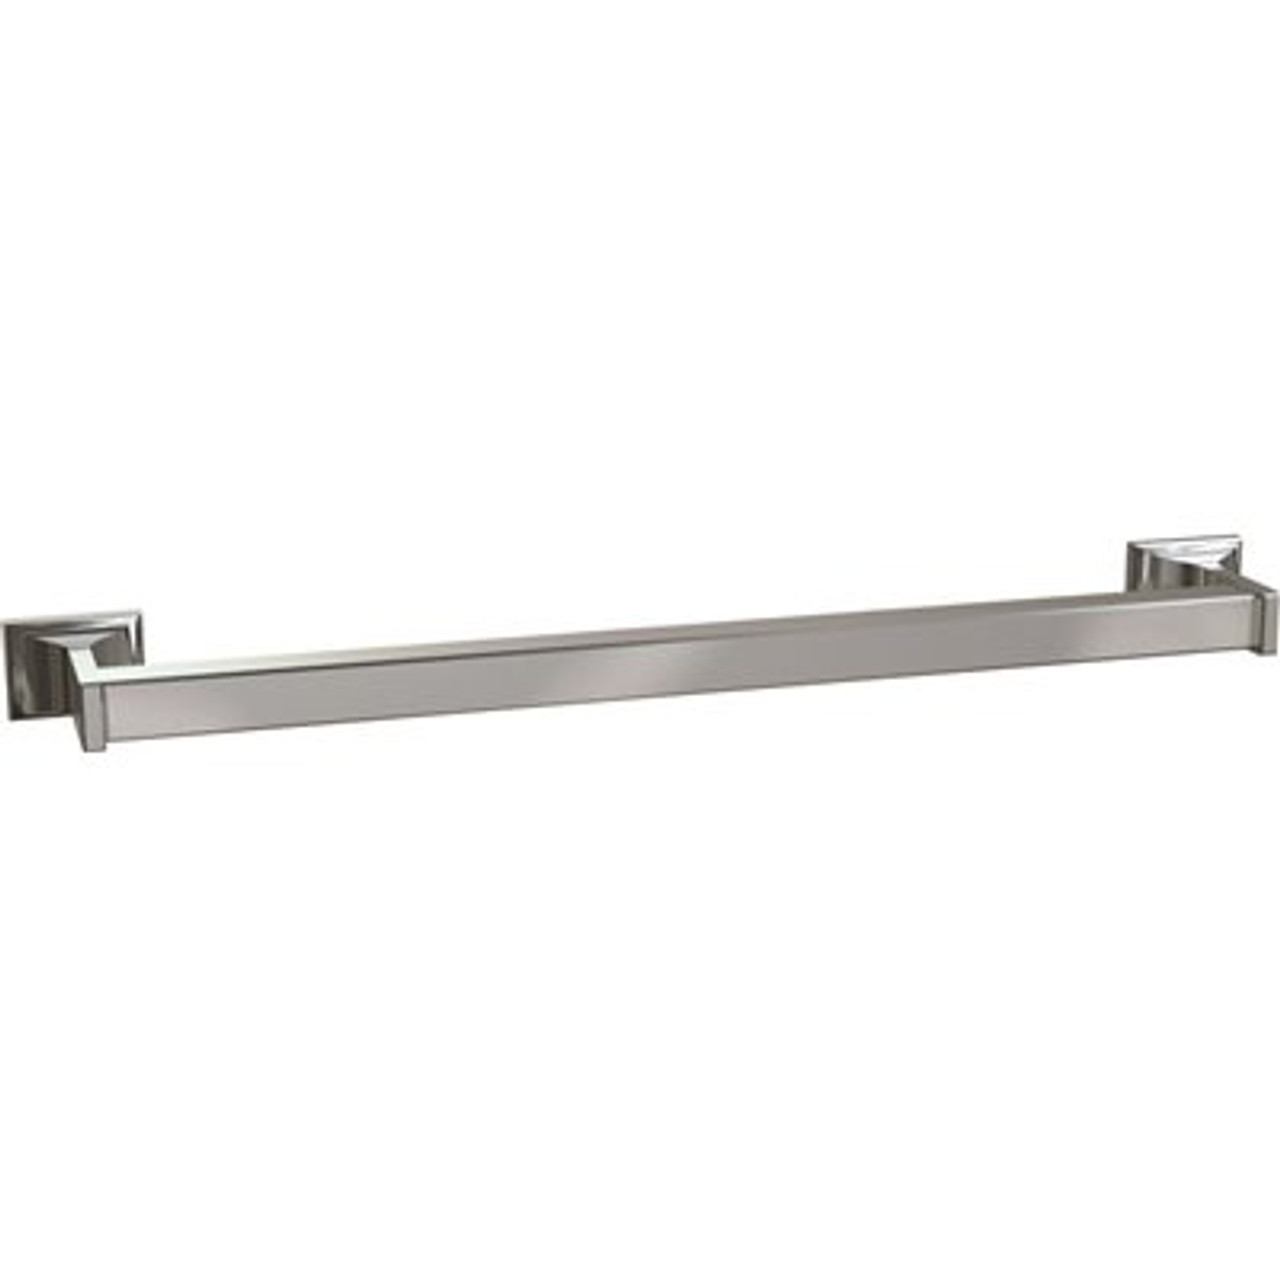 Wall Mounted 18 in. Square Towel Bar in Stainless Steel